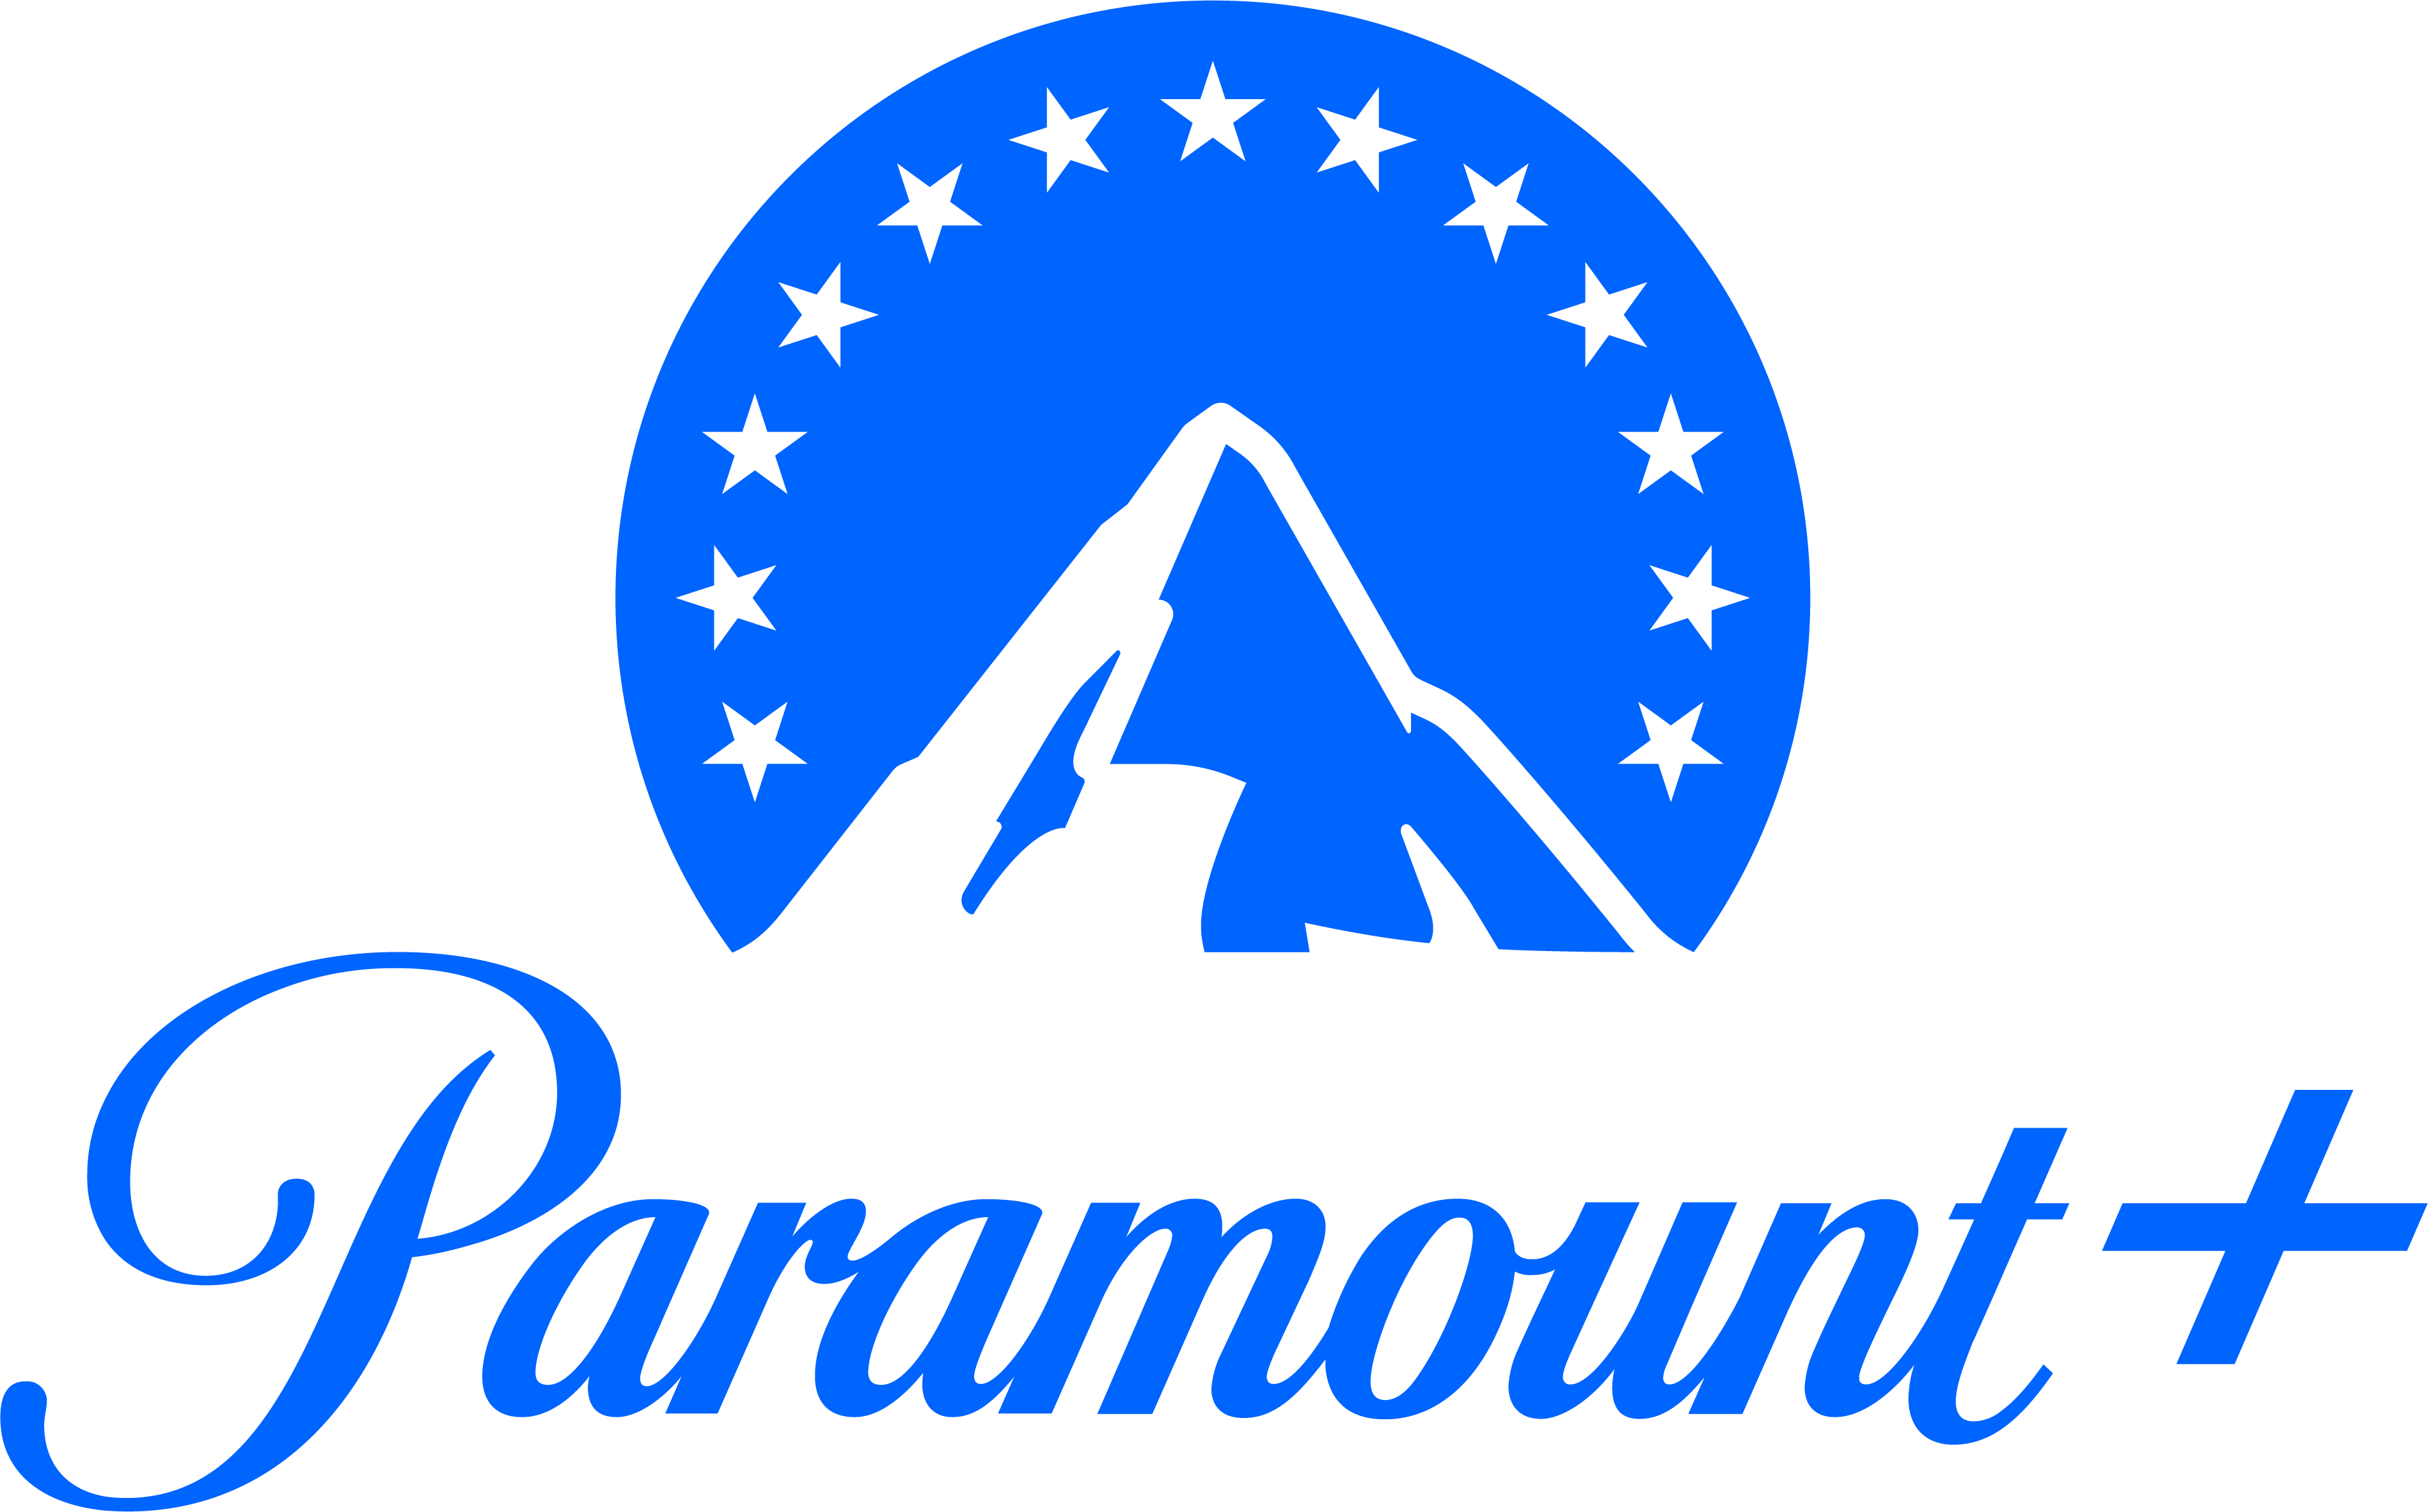 Paramount+ Set to Become Major Streaming Player with One New Movie a